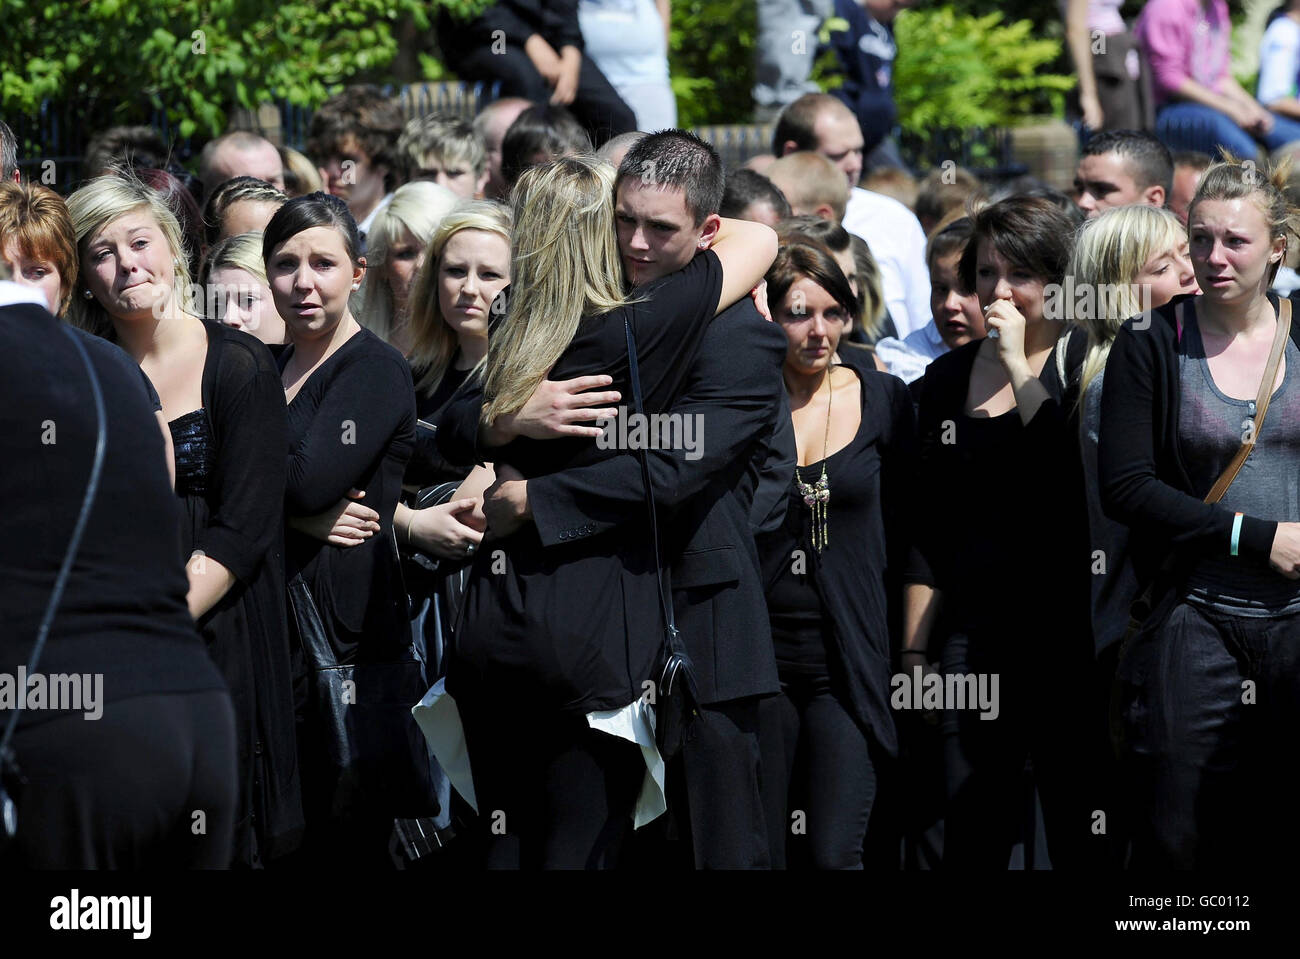 Family and friends of Rifleman James Backhouse during the funeral procession for the soldier in Castleford, West Yorkshire. Backhouse died in an explosion near Sangin in Helmand province on July 10. Stock Photo